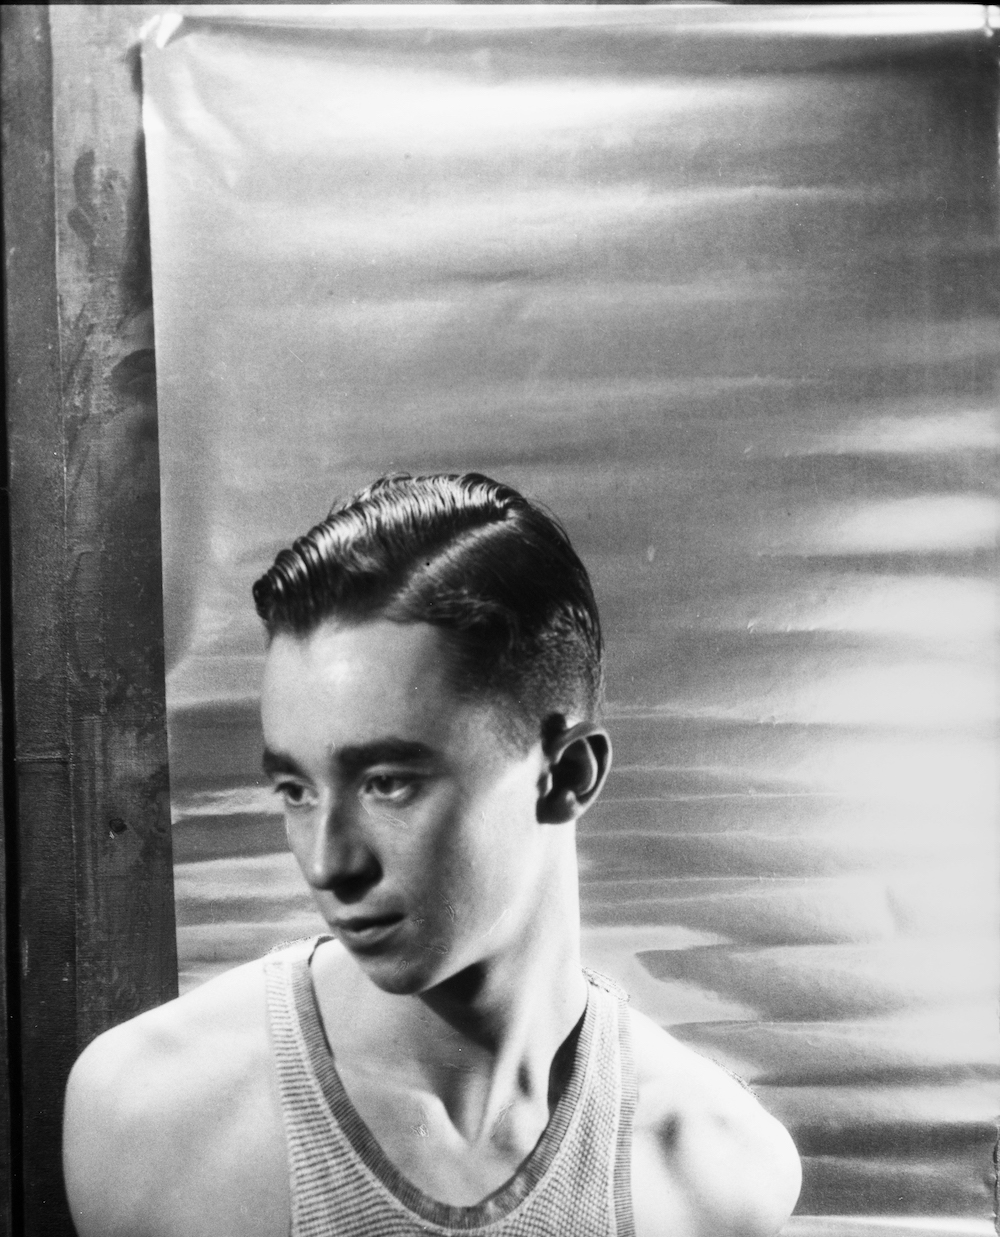  Young Charles James photographed by his friend Cecil Beaton circa 1930. Image courtesy of Rizzoli. 